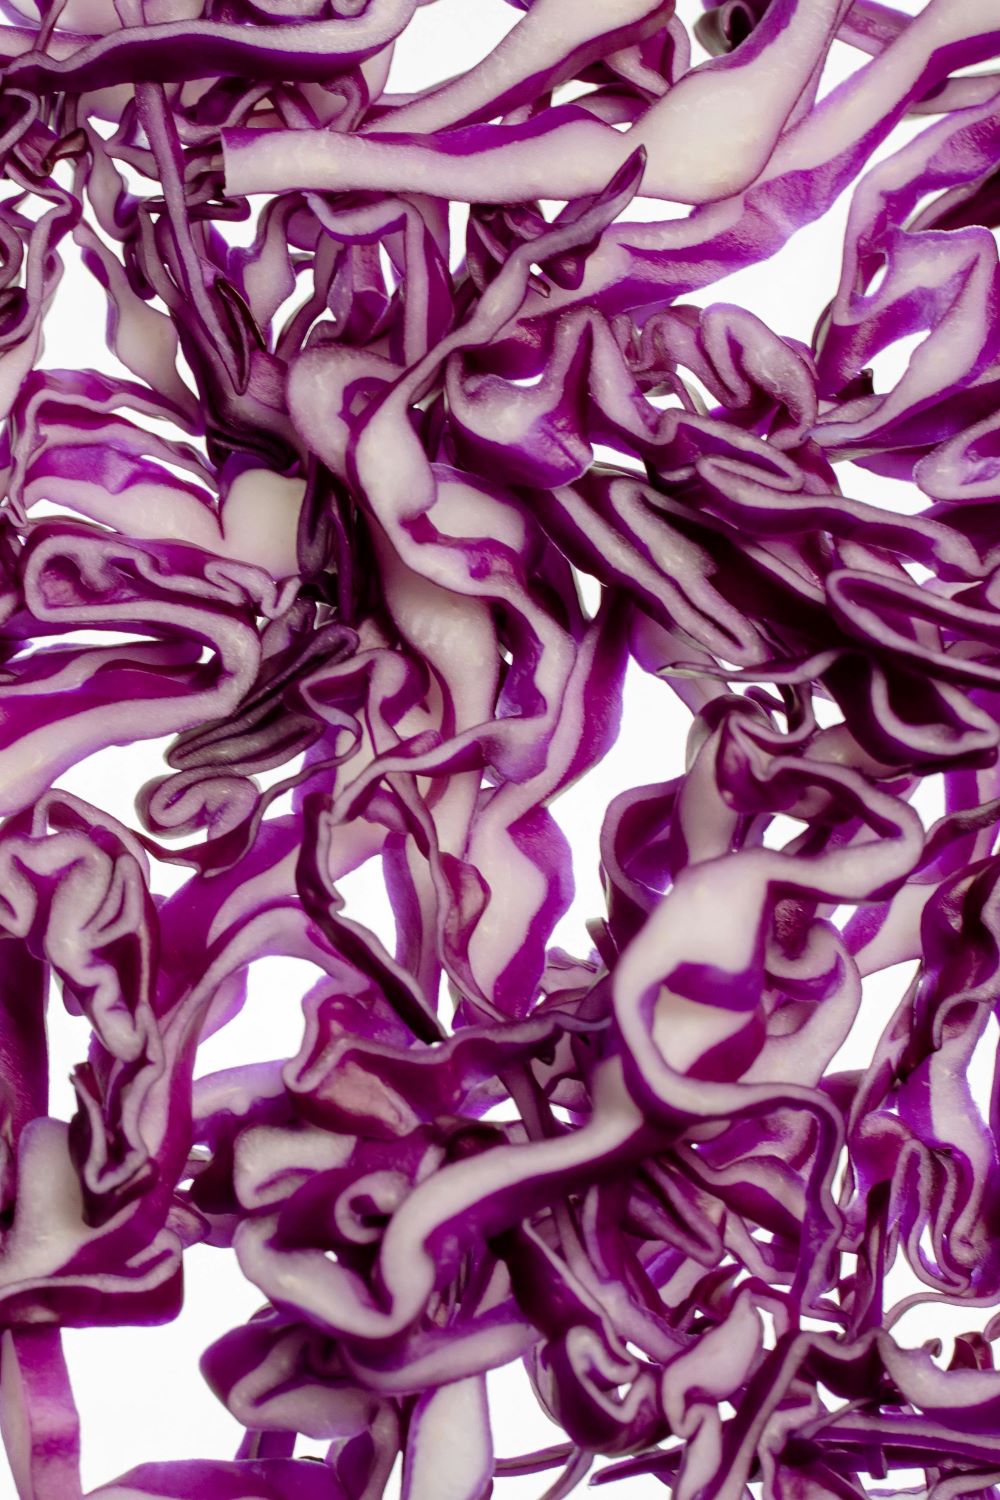 New Study Shows Red Cabbage Juice is Beneficial for Gut Health